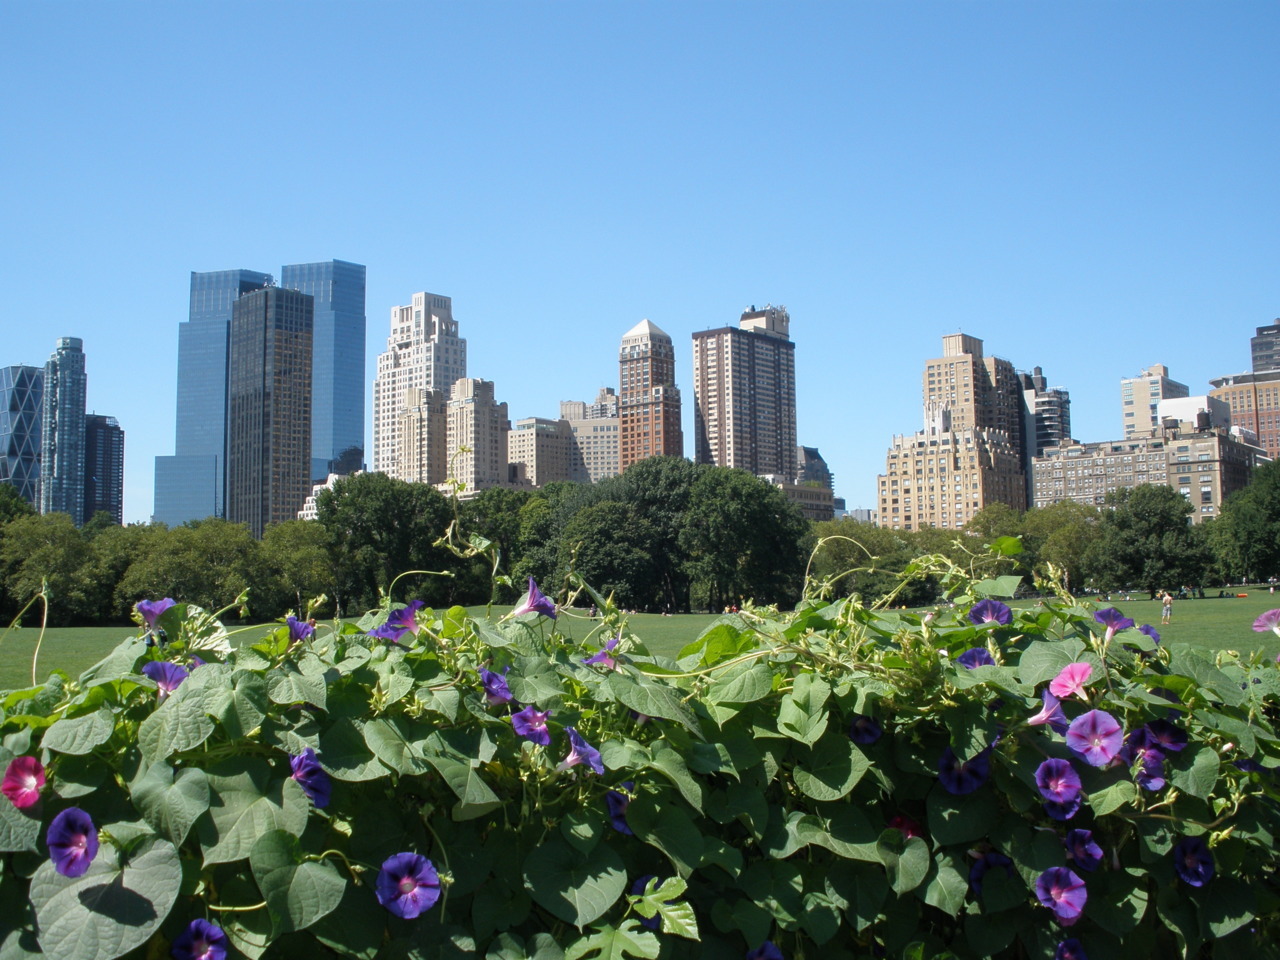 The City; New York blooming
Photo by Christian Ledan 08/2008